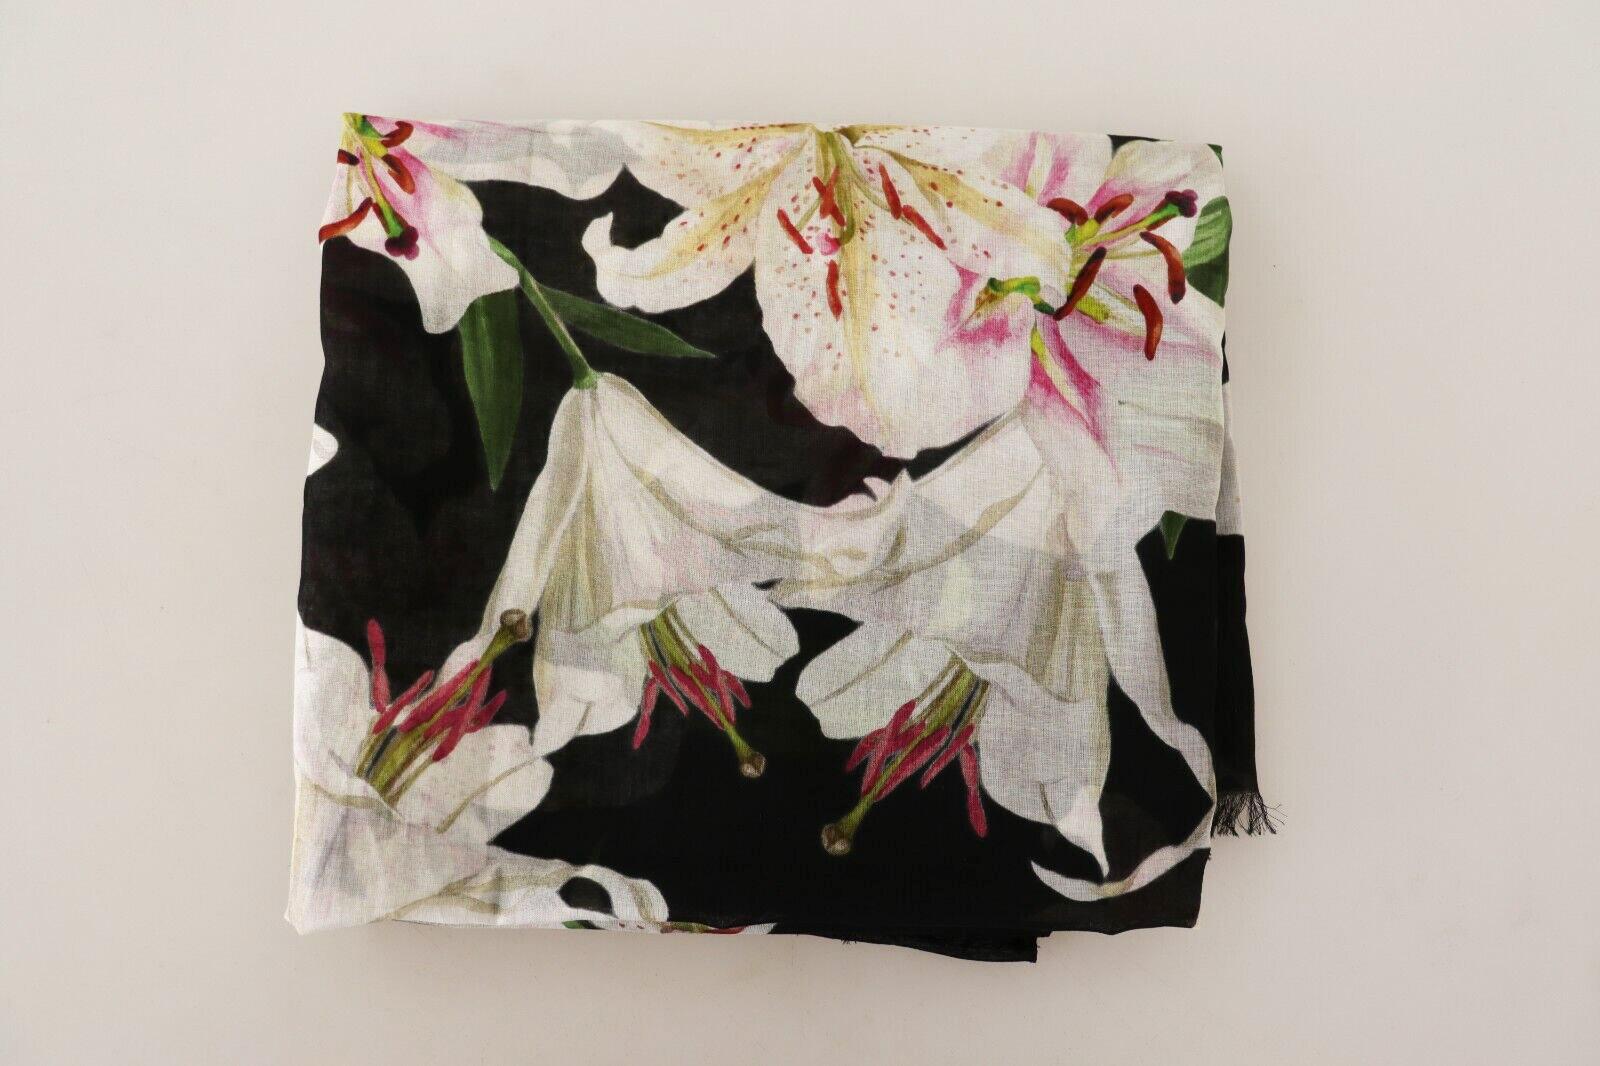 Gorgeous brand new with tags, 100% Authentic Dolce & Gabbana women scarf with lilies print crafted from cotton.


Gender: Women
Color: Black with lilies print
Material: 100% Cotton

Logo details
Made in Italy

Size: 110cm x 185cm

Original tags